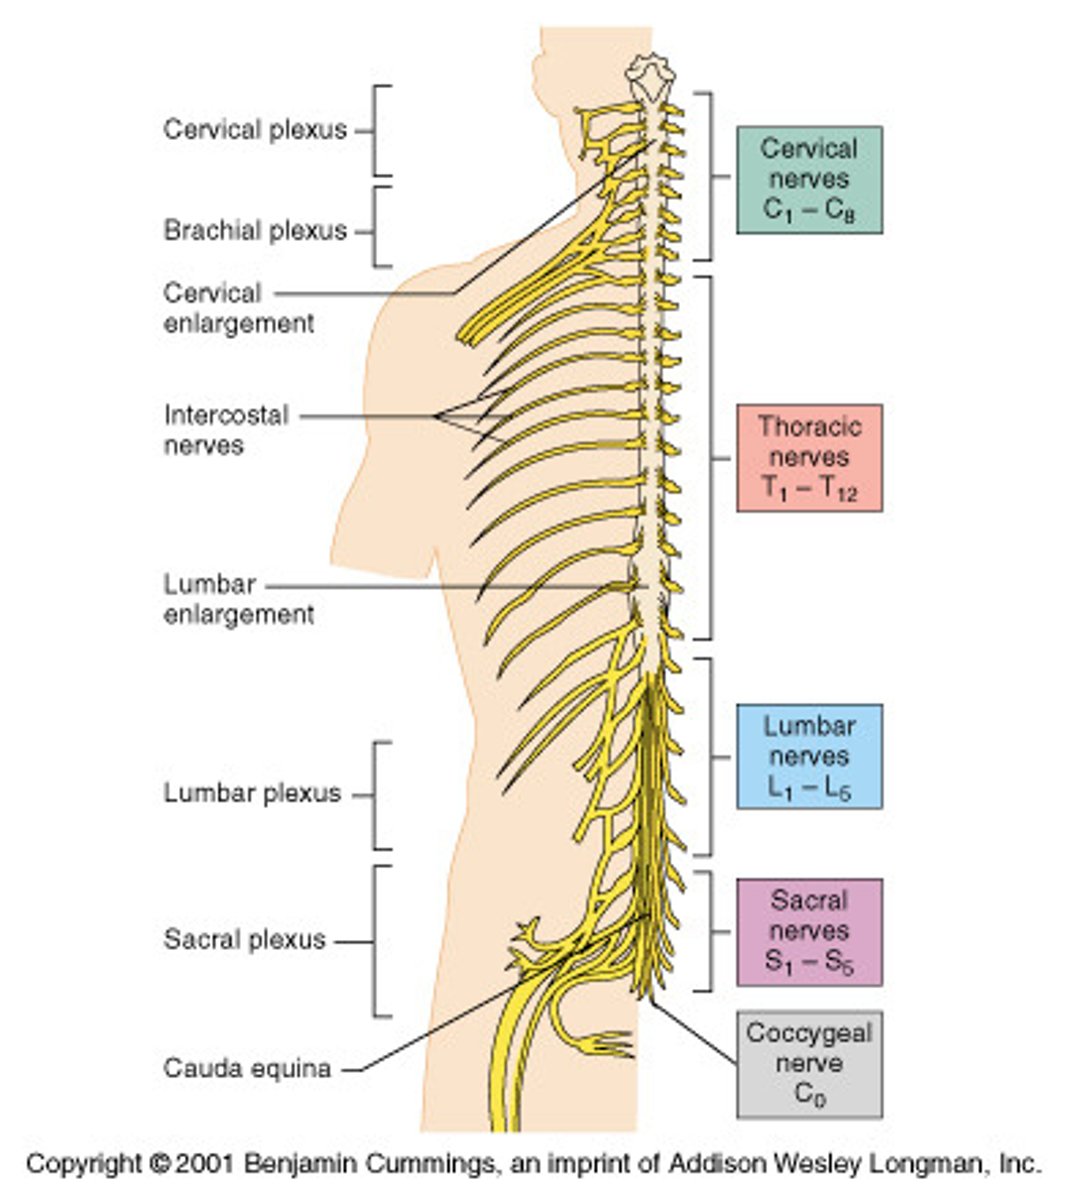 <p>31 pairs of nerves arising from the spinal cord</p><p>8 cervical</p><p>12 thoracic</p><p>5 lumbar</p><p>5 sacral</p><p>1 coccygeal</p>